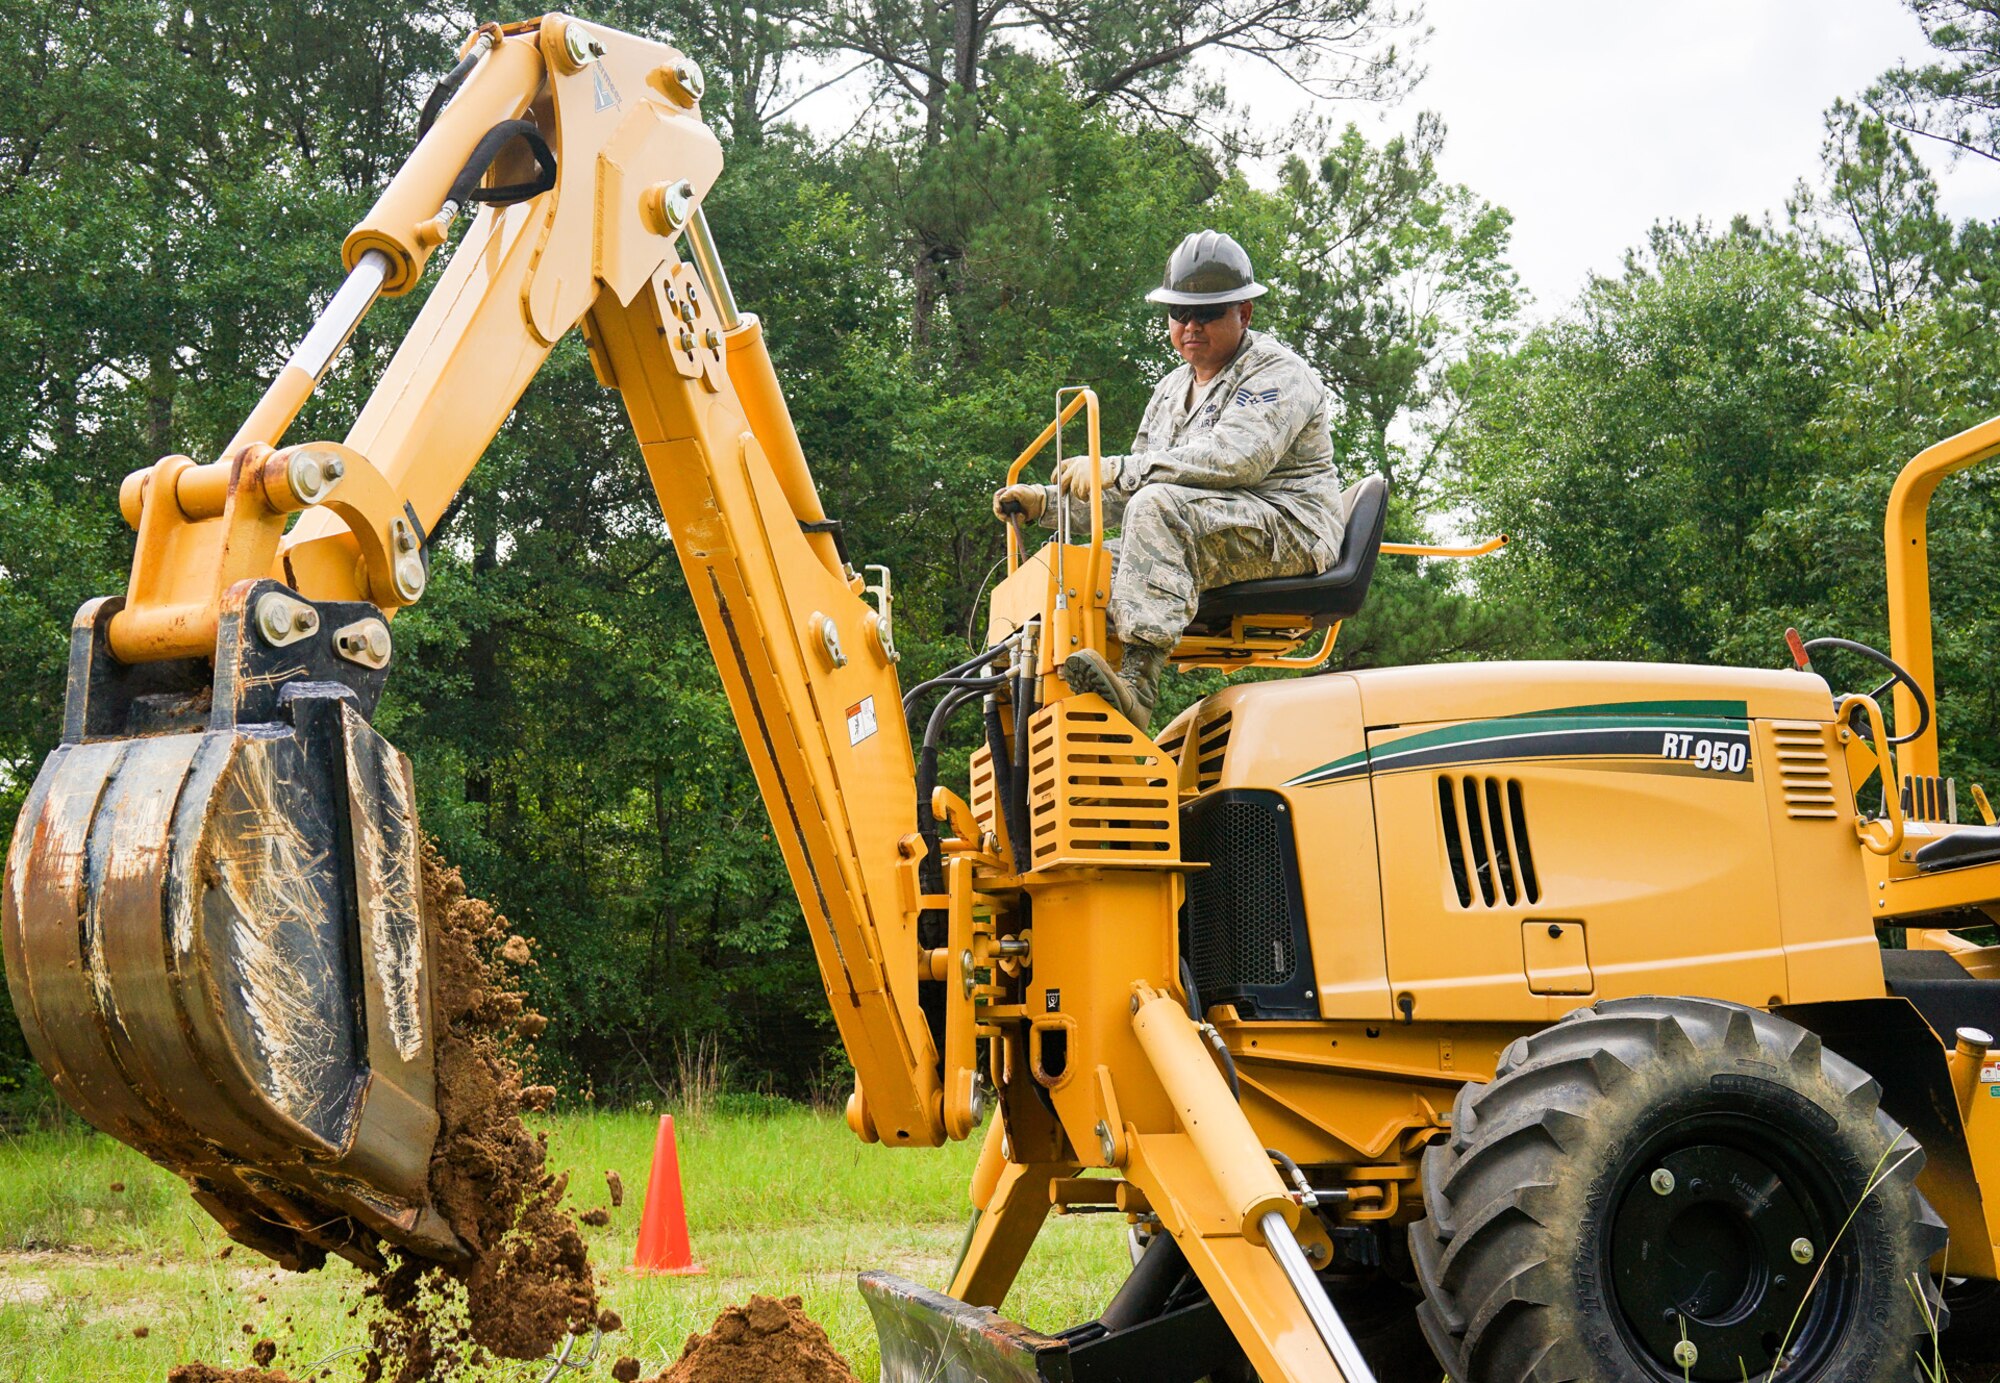 U.S. Air Force Staff Sgt. Chymann Lao, a cable and antenna systems specialist with the 202nd Engineering Installation Squadron (EIS), Georgia Air National Guard, digs a trench using a trencher with a backhoe attachment during a weeklong training exercise at Robins Air Force Base, Ga., June 11, 2015. More than 80 Airmen were certified in career-field tasks crucial to the unit’s deployed and homeland missions. The 202nd EIS supports the 116th Air Control Wing and is responsible for the fixed-communications infrastructures for 27 other locations, including the 165th Airlift Wing in Savannah, Georgia, and Air National Guard units in Puerto Rico and the U.S. Virgin Islands. (U.S. Air National Guard photo by Senior Master Sgt. Roger Parsons/Released)